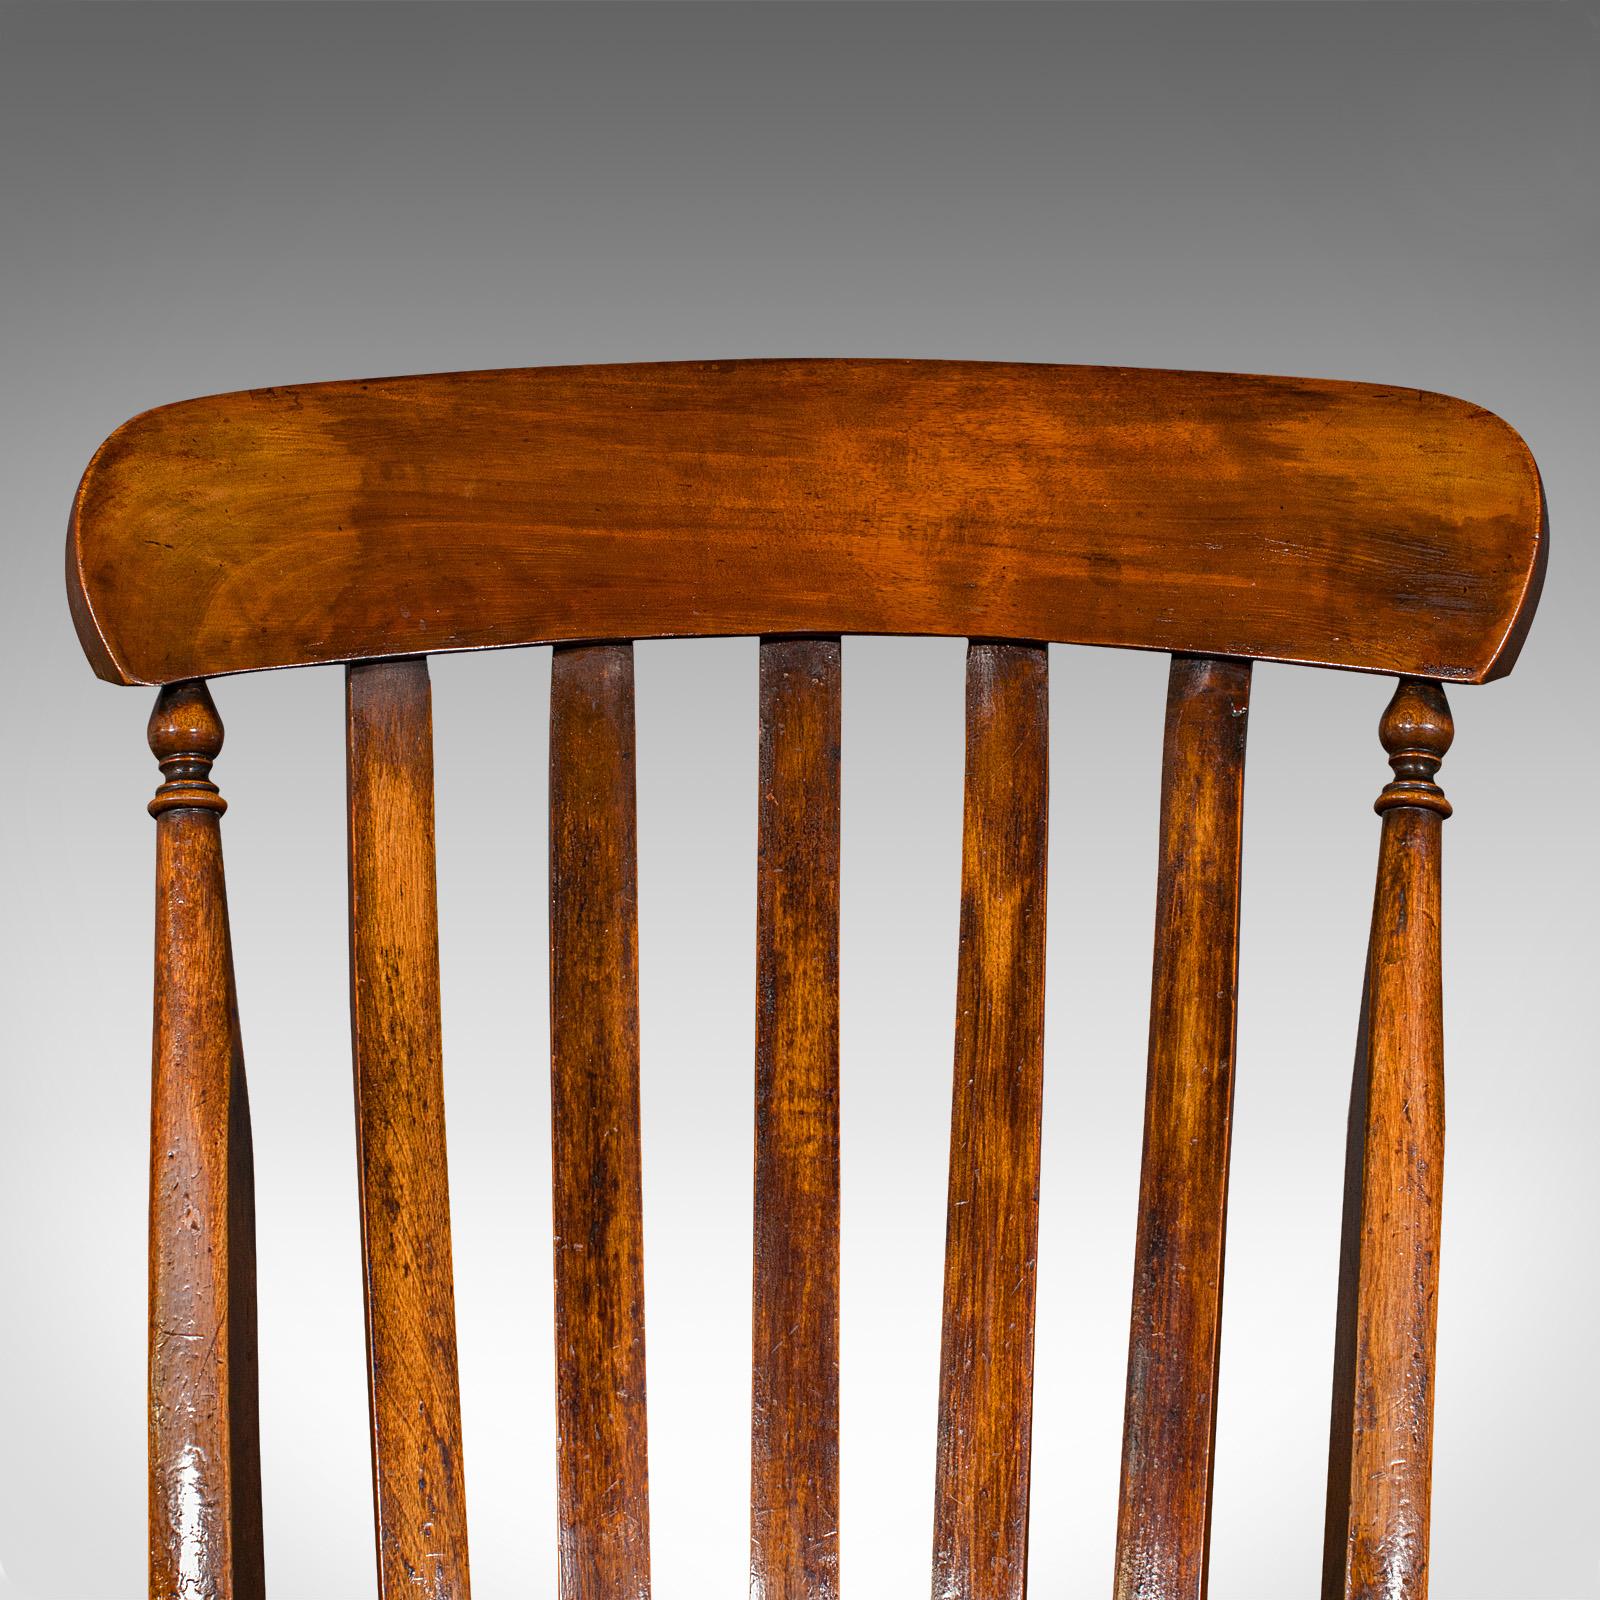 Antique Lath Back Rocking Chair, English Elm, Beech, Elbow Seat, Victorian, 1880 For Sale 4